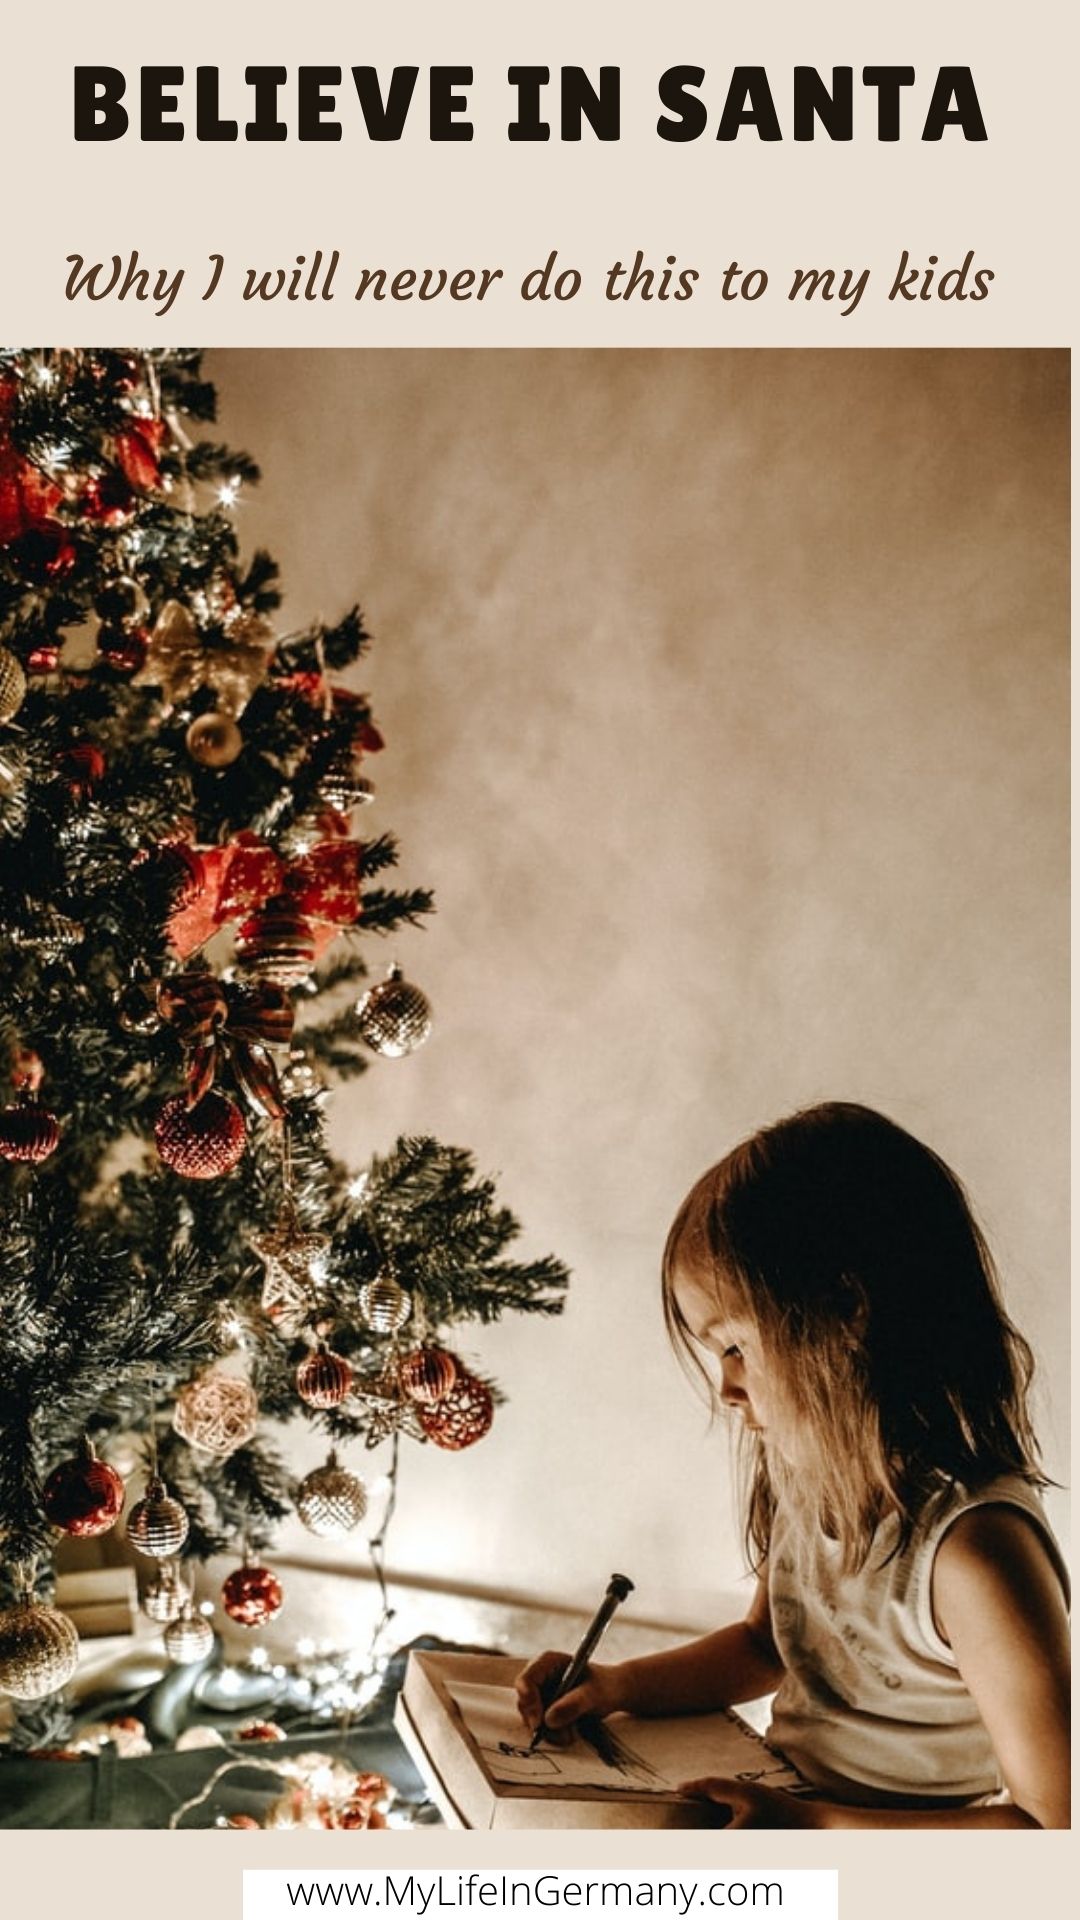 pinterest edited_believe in Santa_why i will never do this to my kids_the time when i found out that my father was santa_santa claus_jonathan-borba-P3Tc5ZxHowk-unsplash